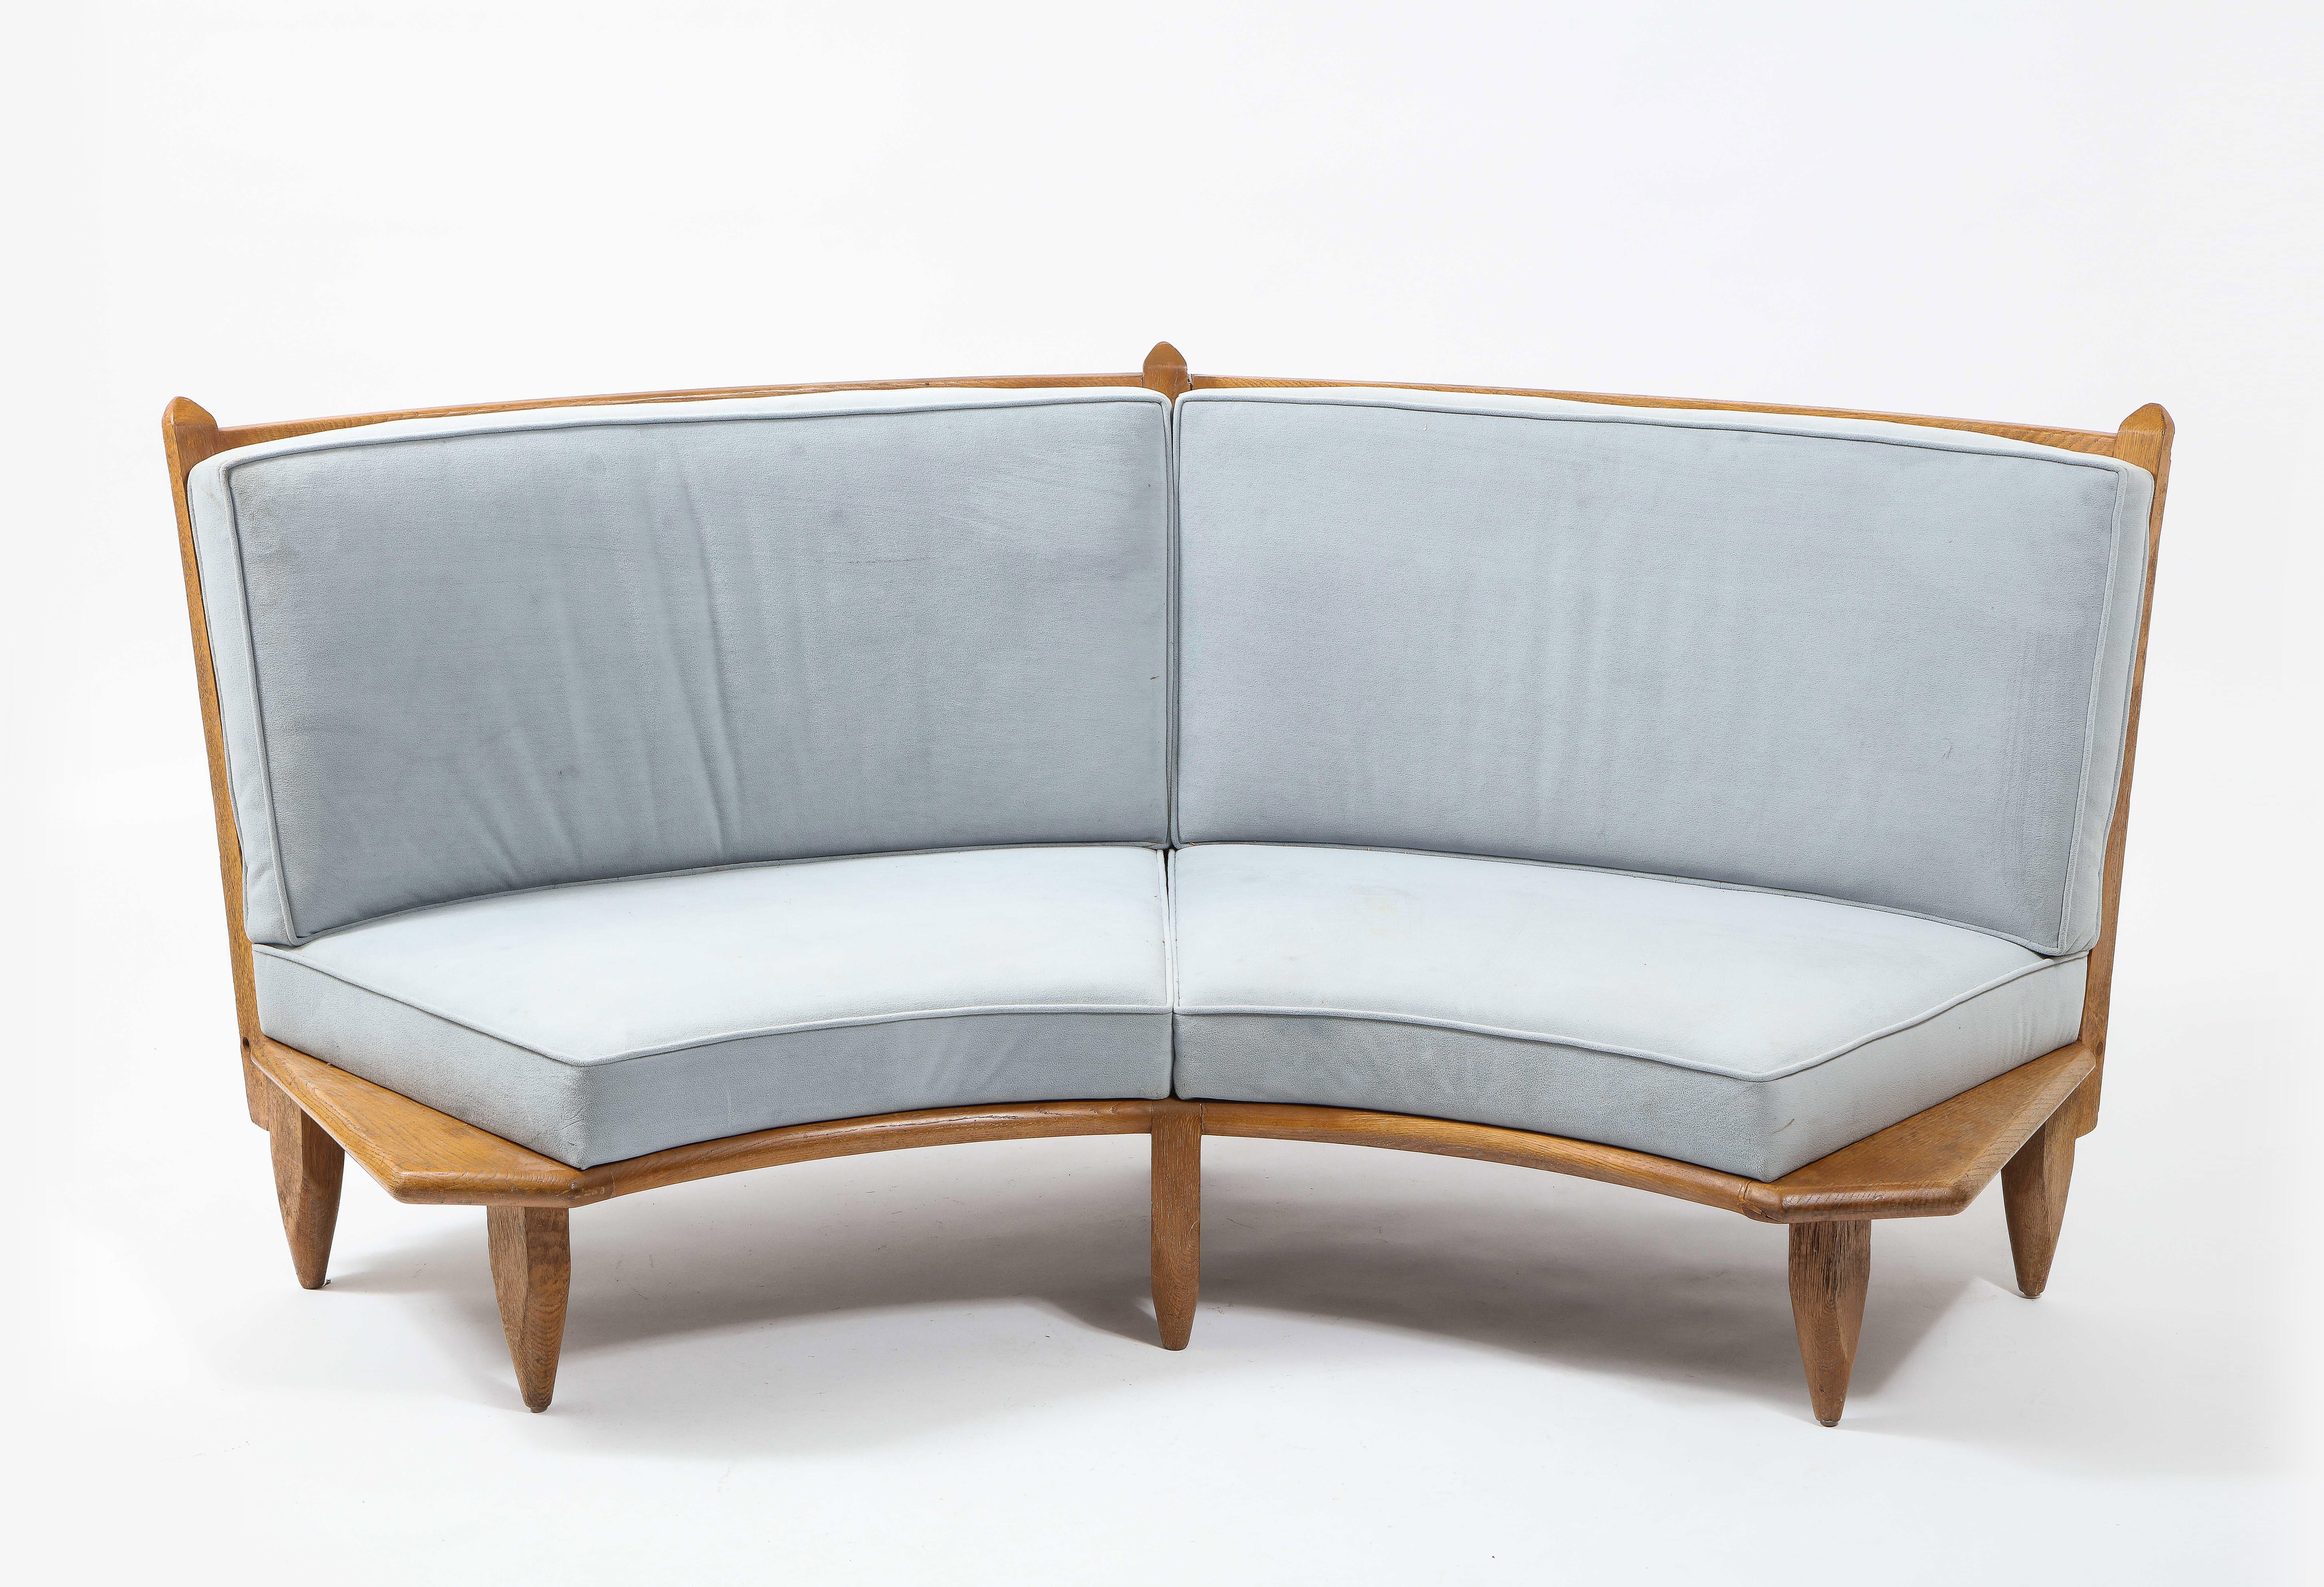 modern curved banquette seating